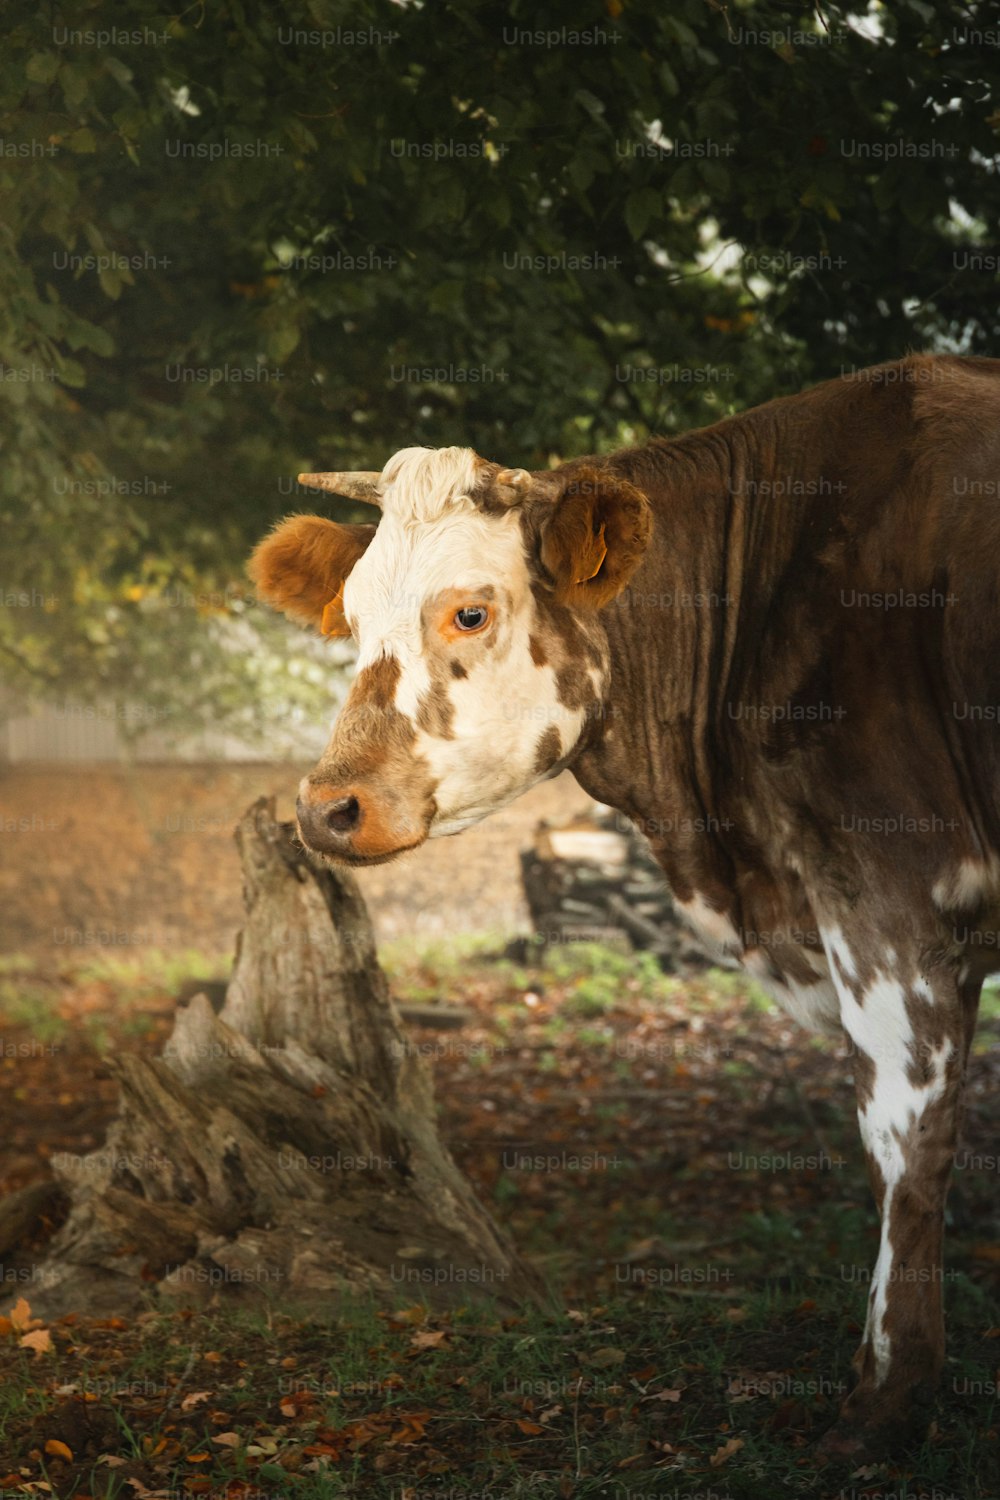 a brown and white cow standing next to a tree